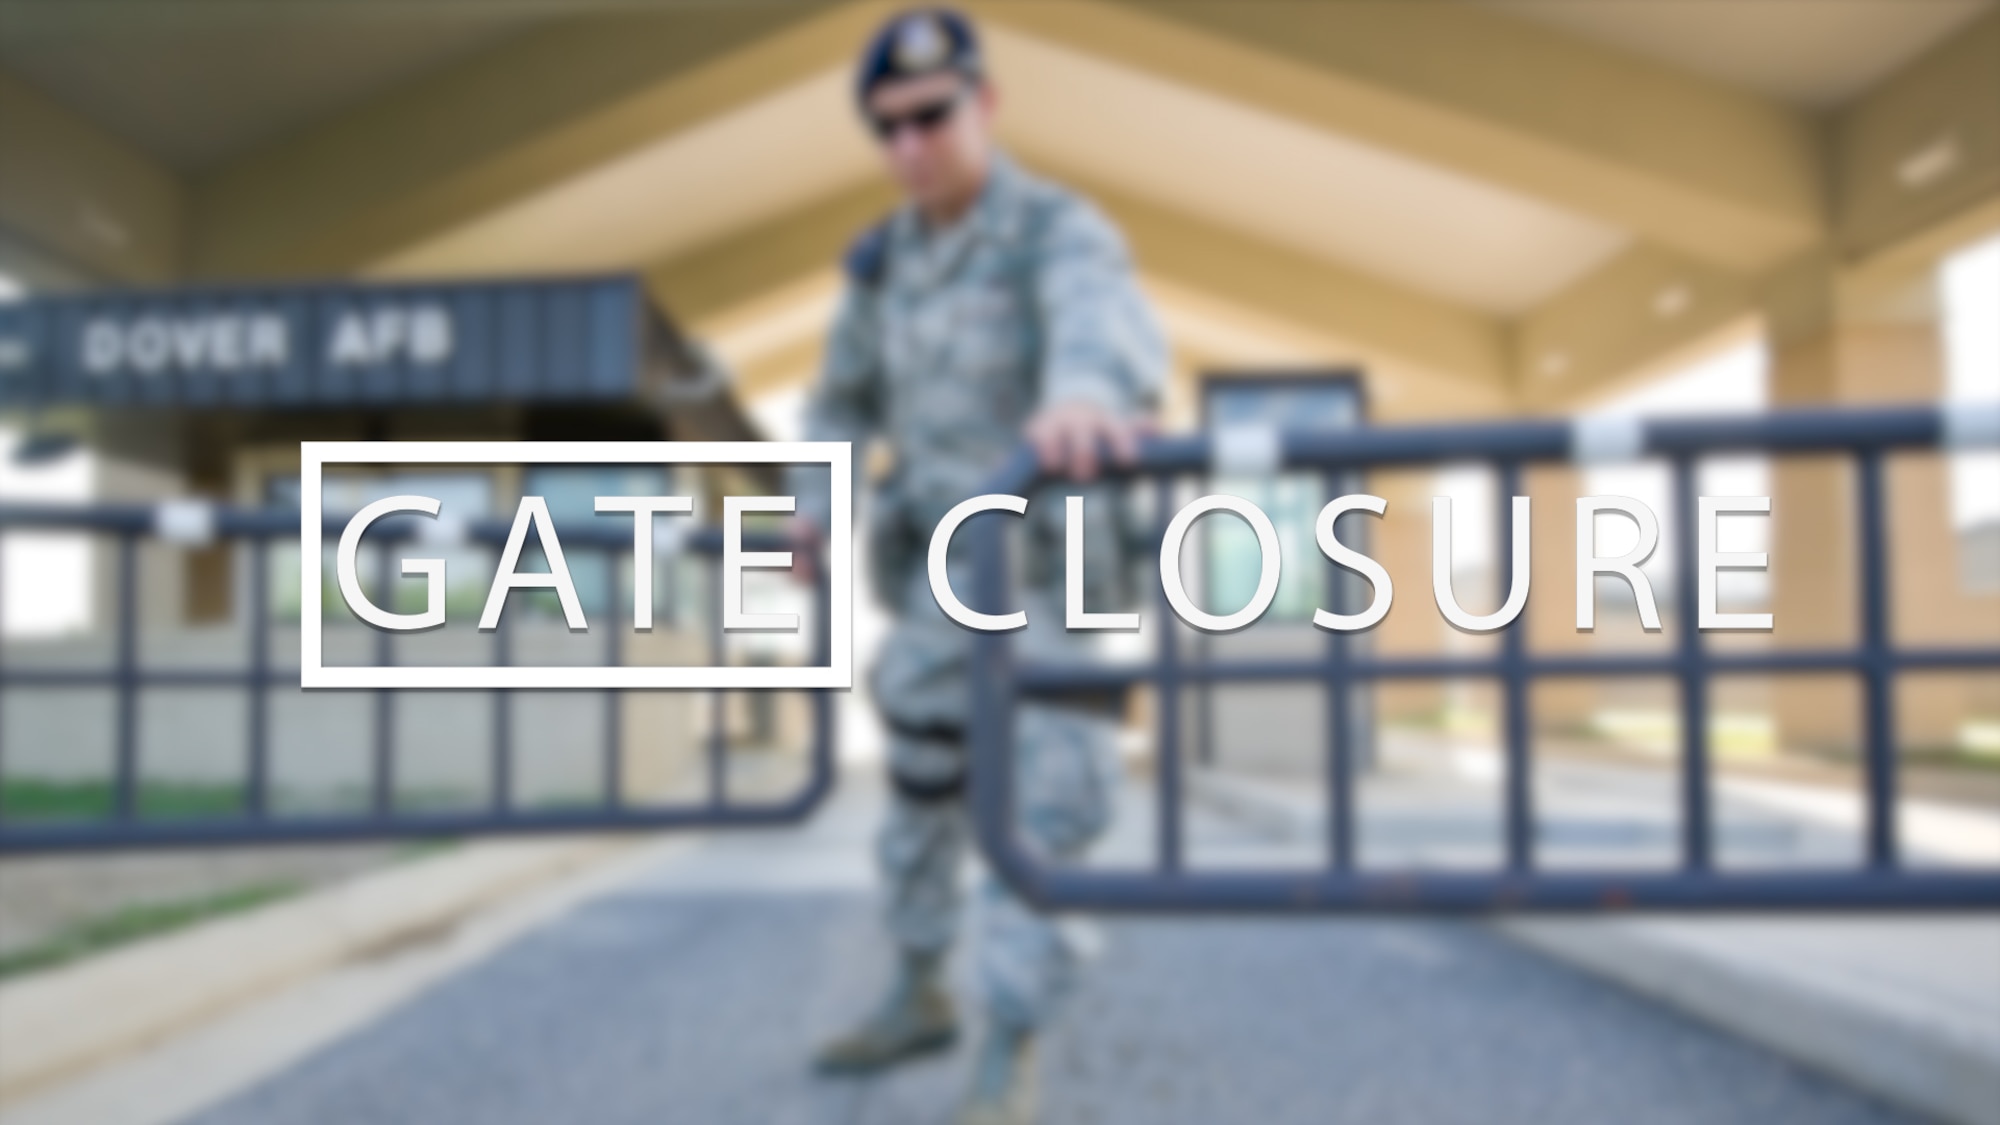 The Main Gate will be closed Saturday, April 13, from 8 a.m. until 12 p.m. to all inbound and outbound vehicle and pedestrian traffic. During this time, the North Gate will remain open as the base's primary entry and exit point. (U.S. Air Force graphic by Staff Sgt. Zoe Russell)